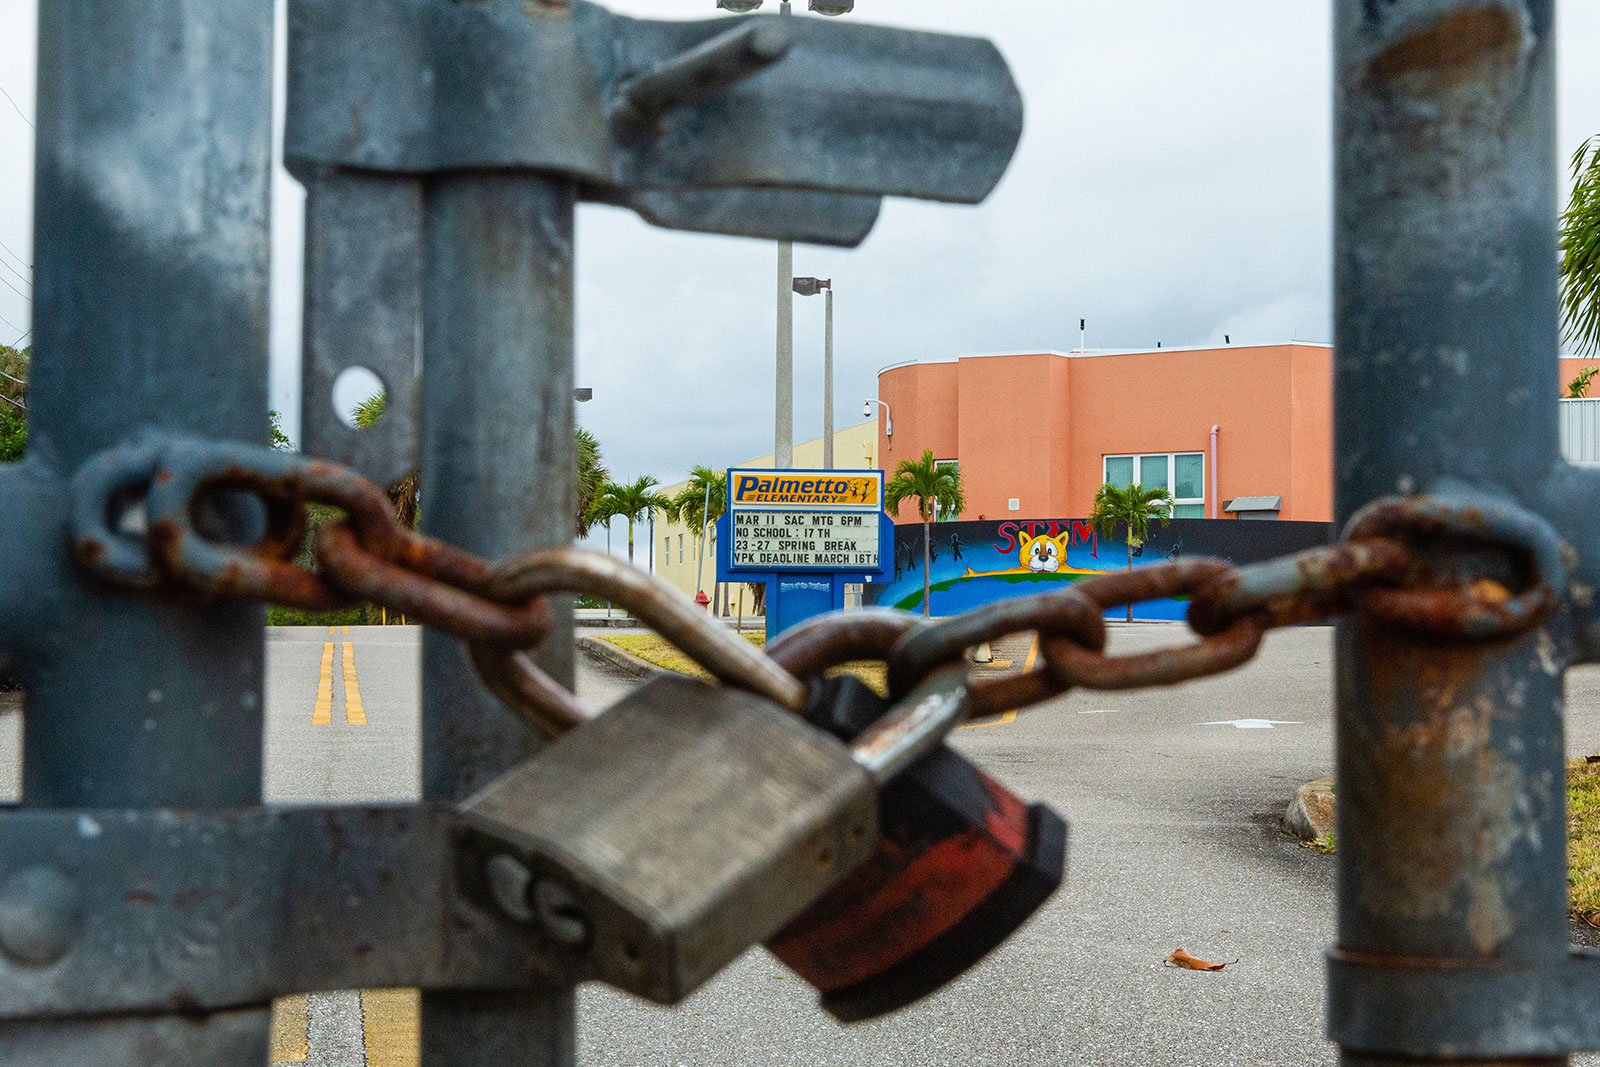 The exterior gates of Palmetto Elementary School in West Palm Beach are locked shut following the school's closure due to the coronavirus pandemic.